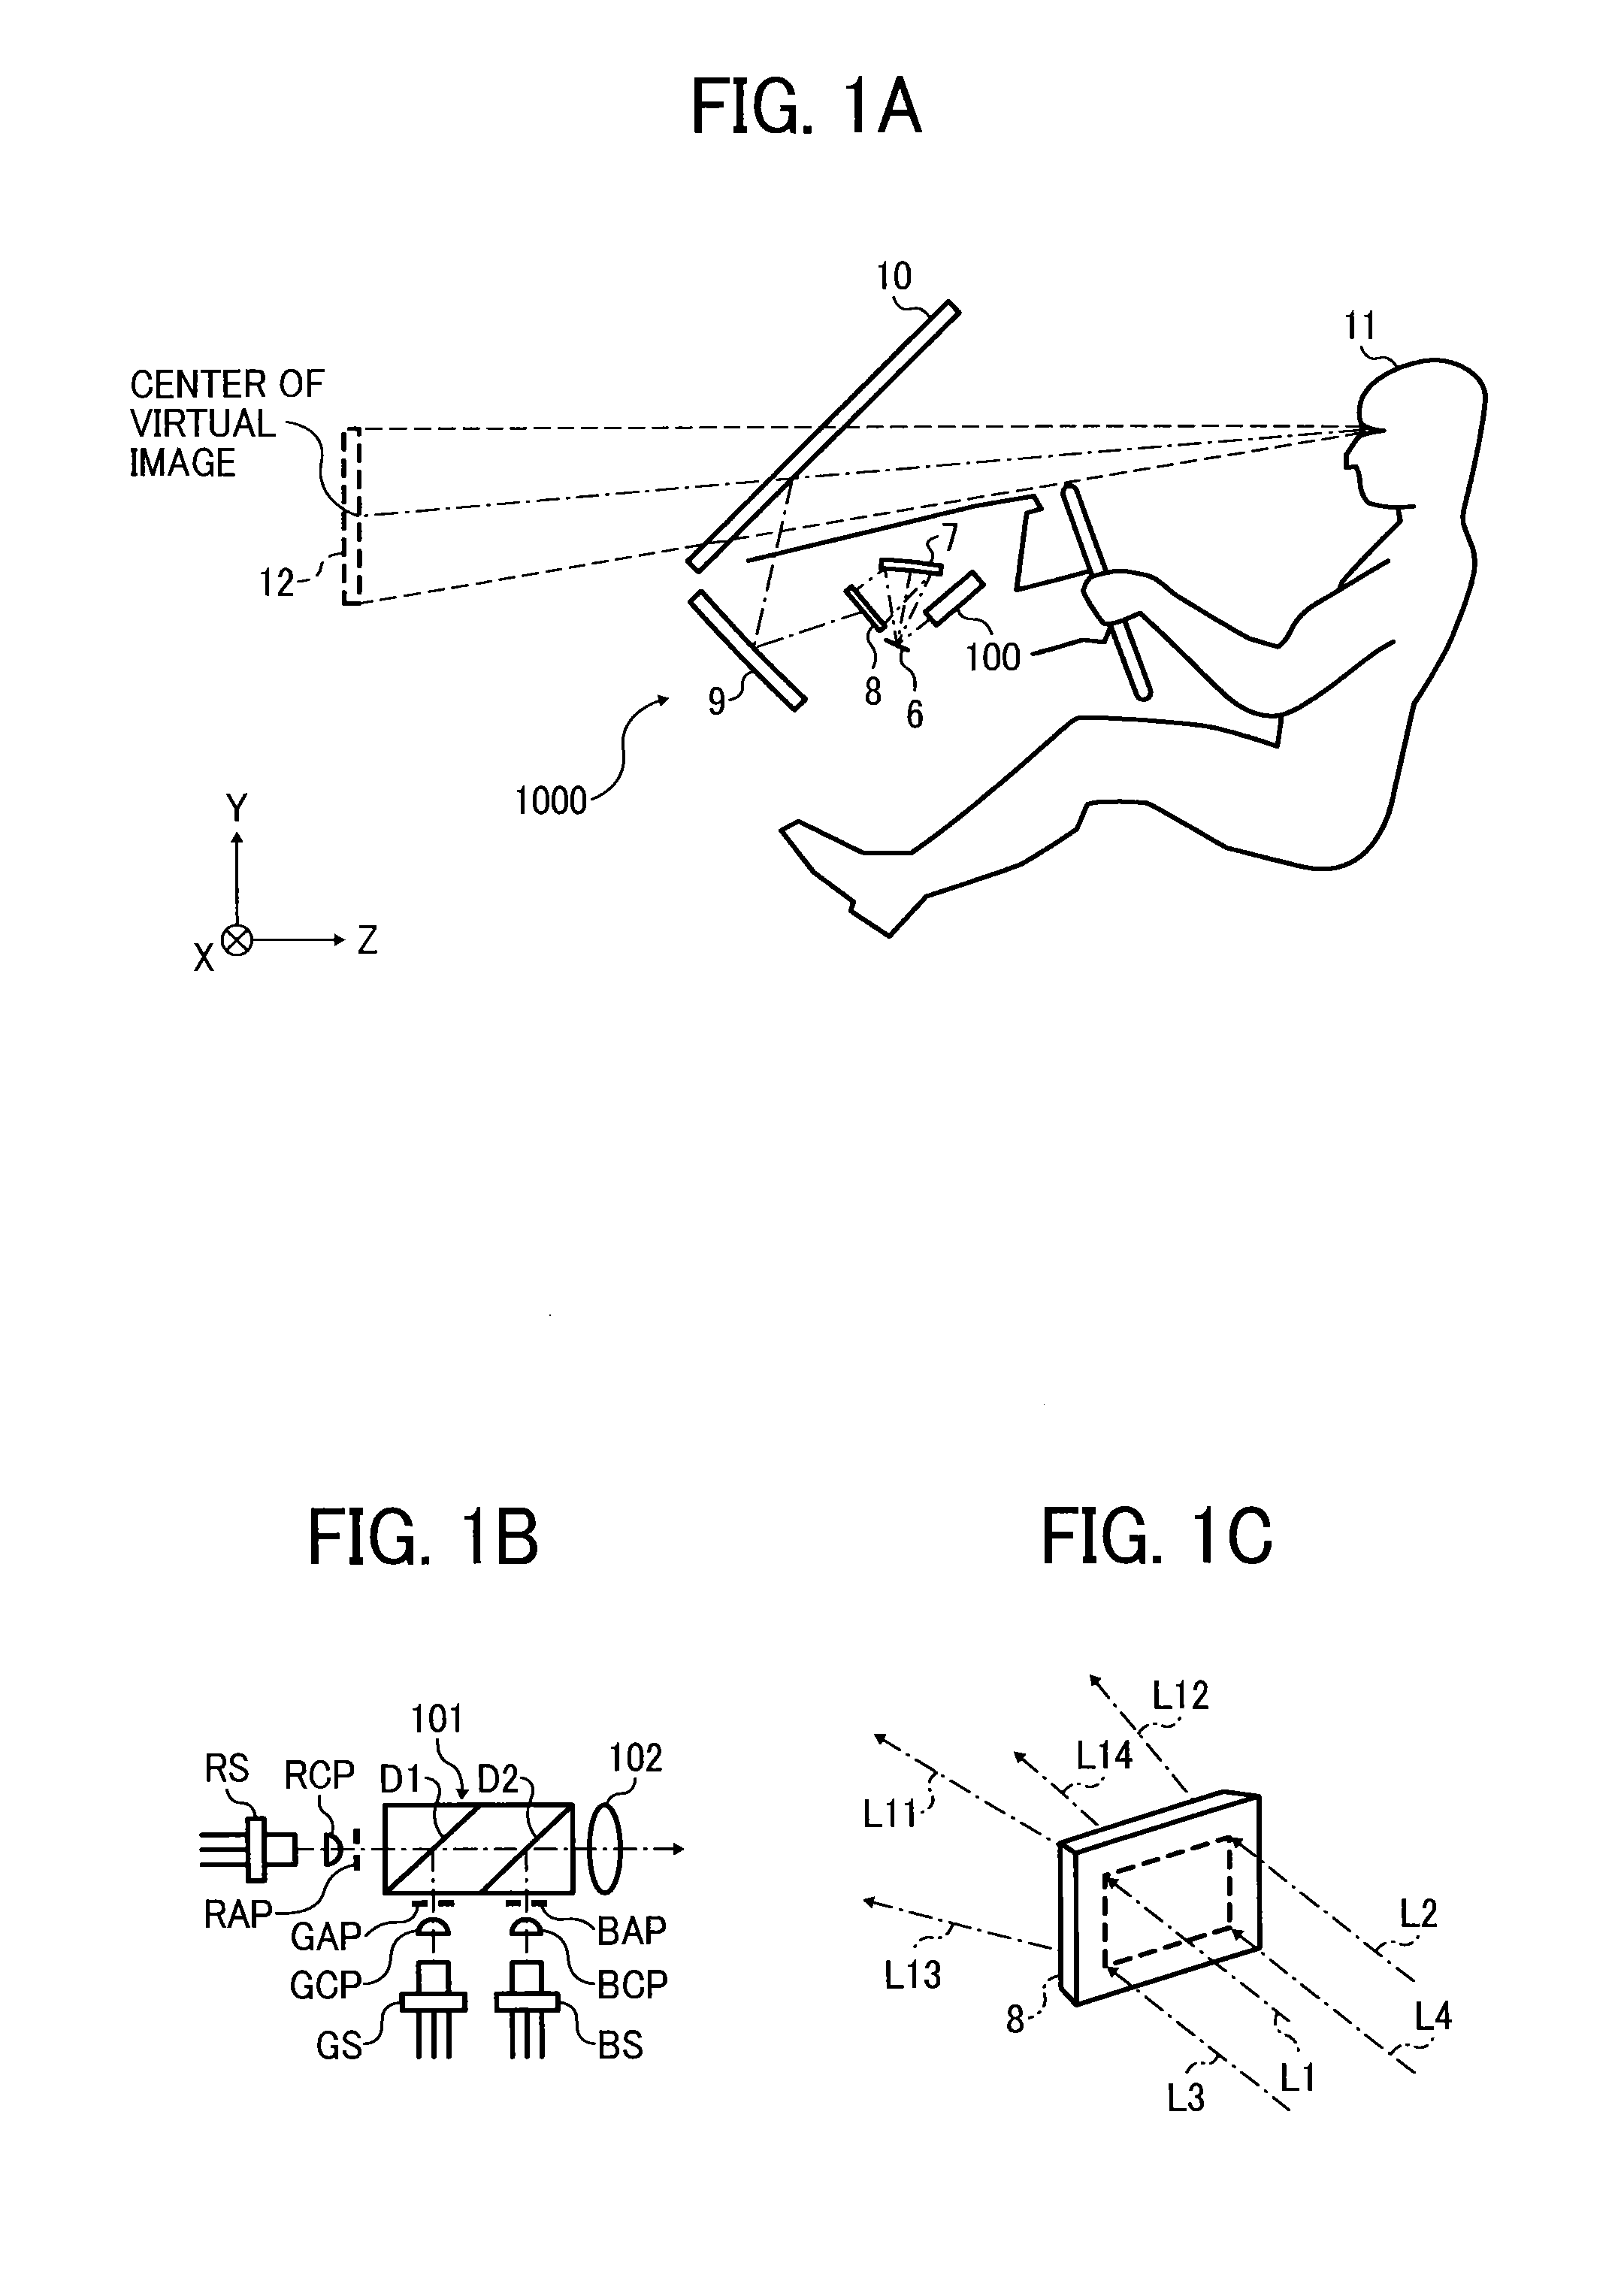 Image display apparatus and object apparatus